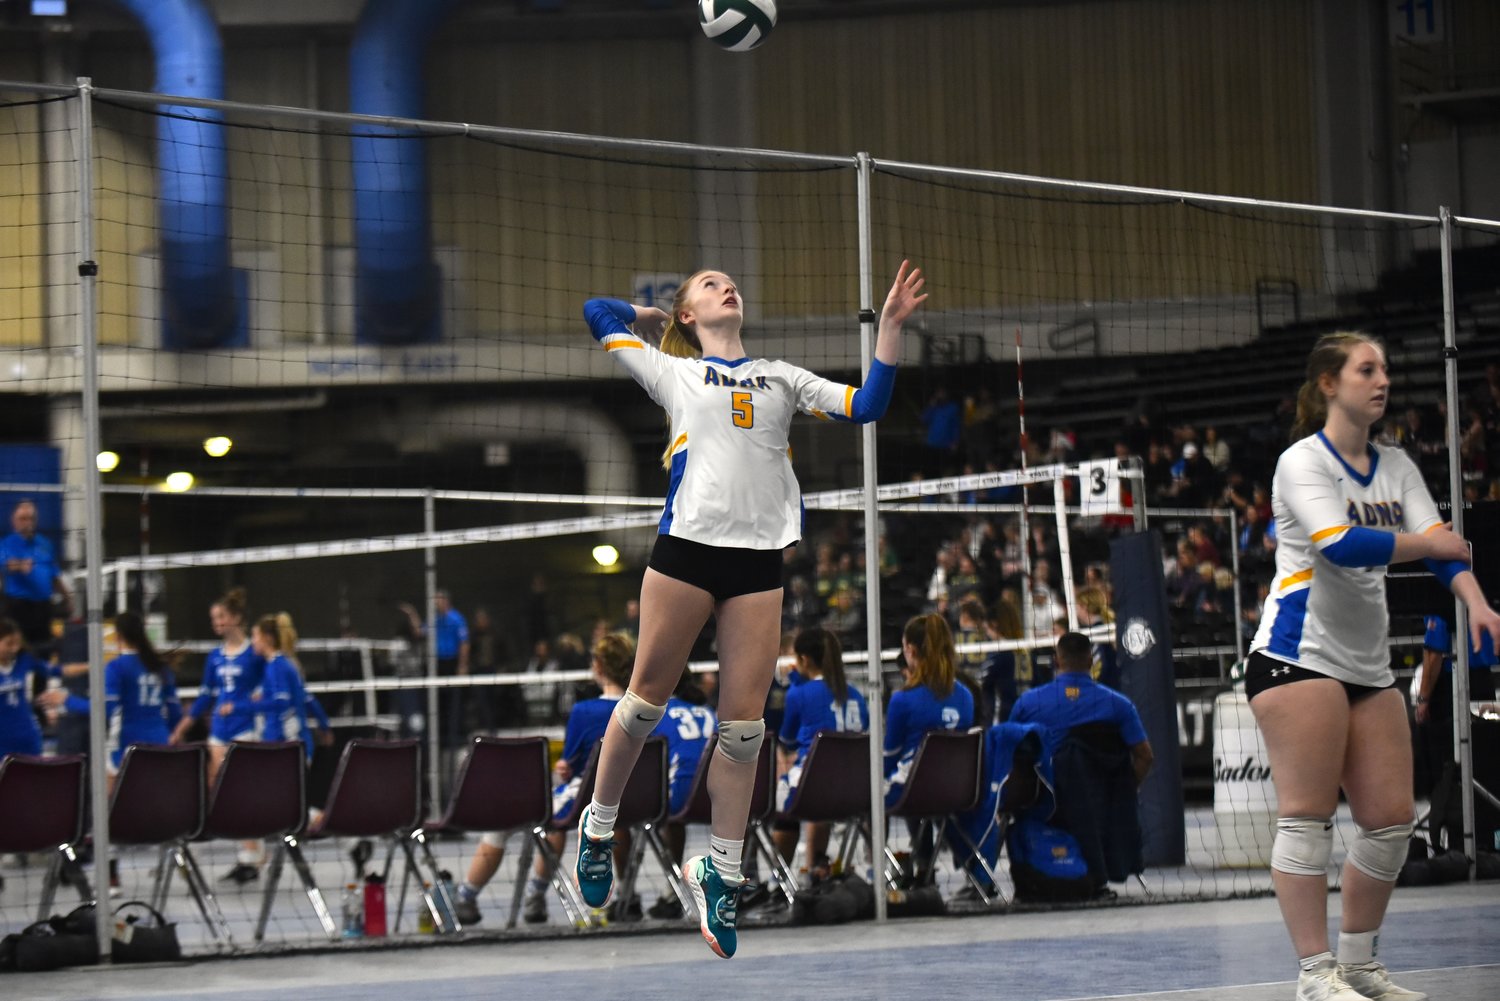 Gaby Guard puts up a serve to start off No. 5 Adna's three-set win over No. 12 Tri-Cities Prep in the first round of the 2B state volleyball tournament on Nov. 10, at the Yakima Valley SunDome.